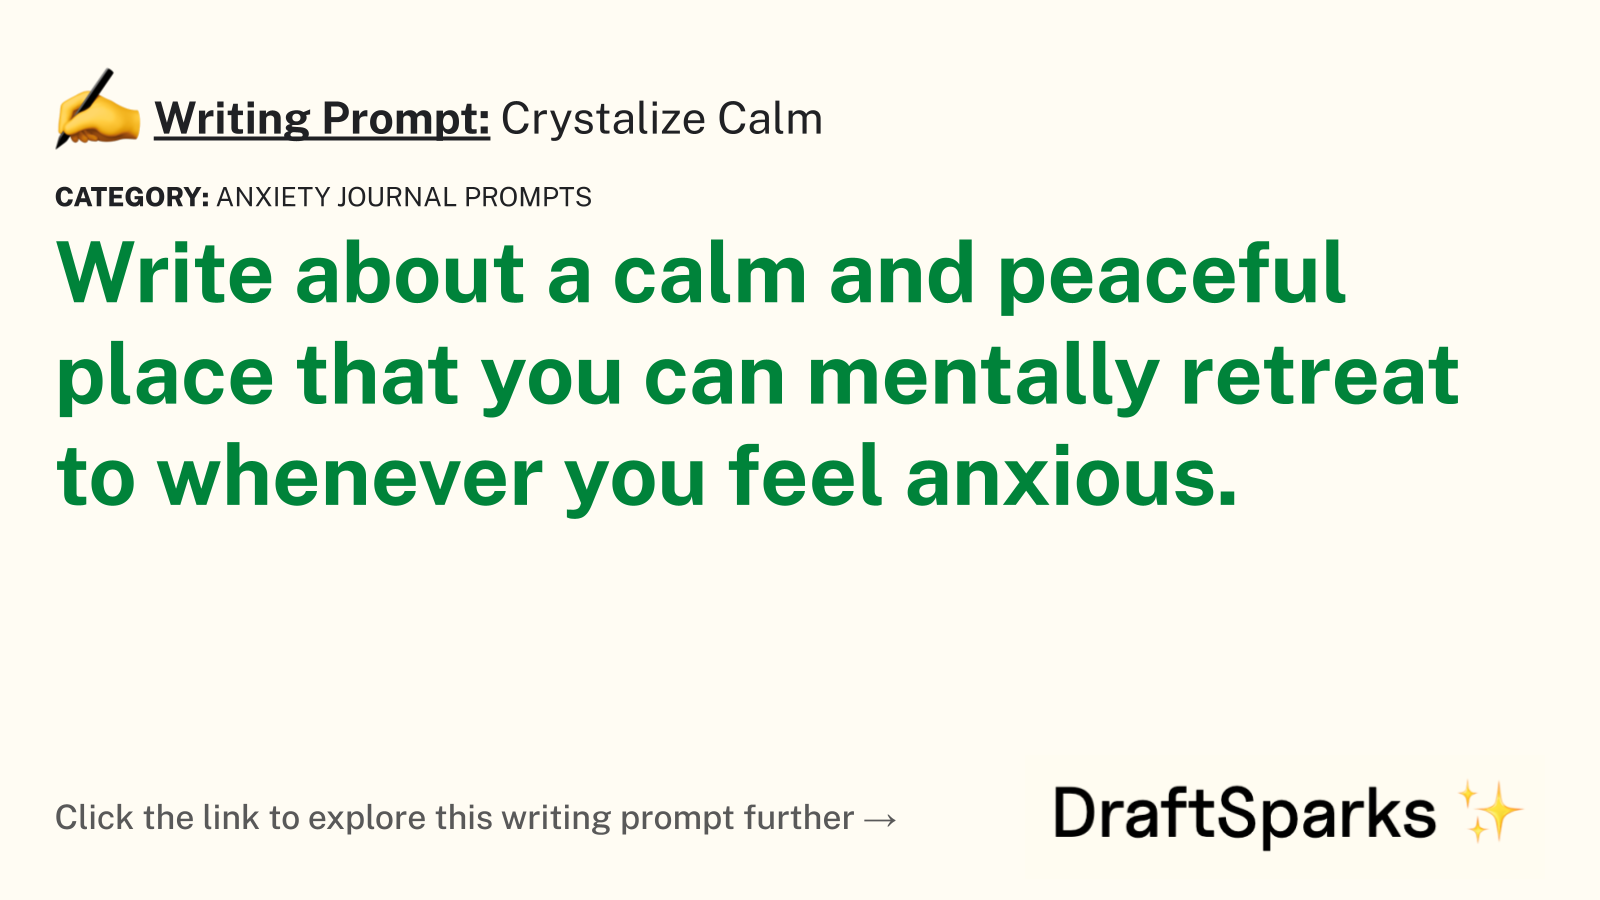 Crystalize Calm